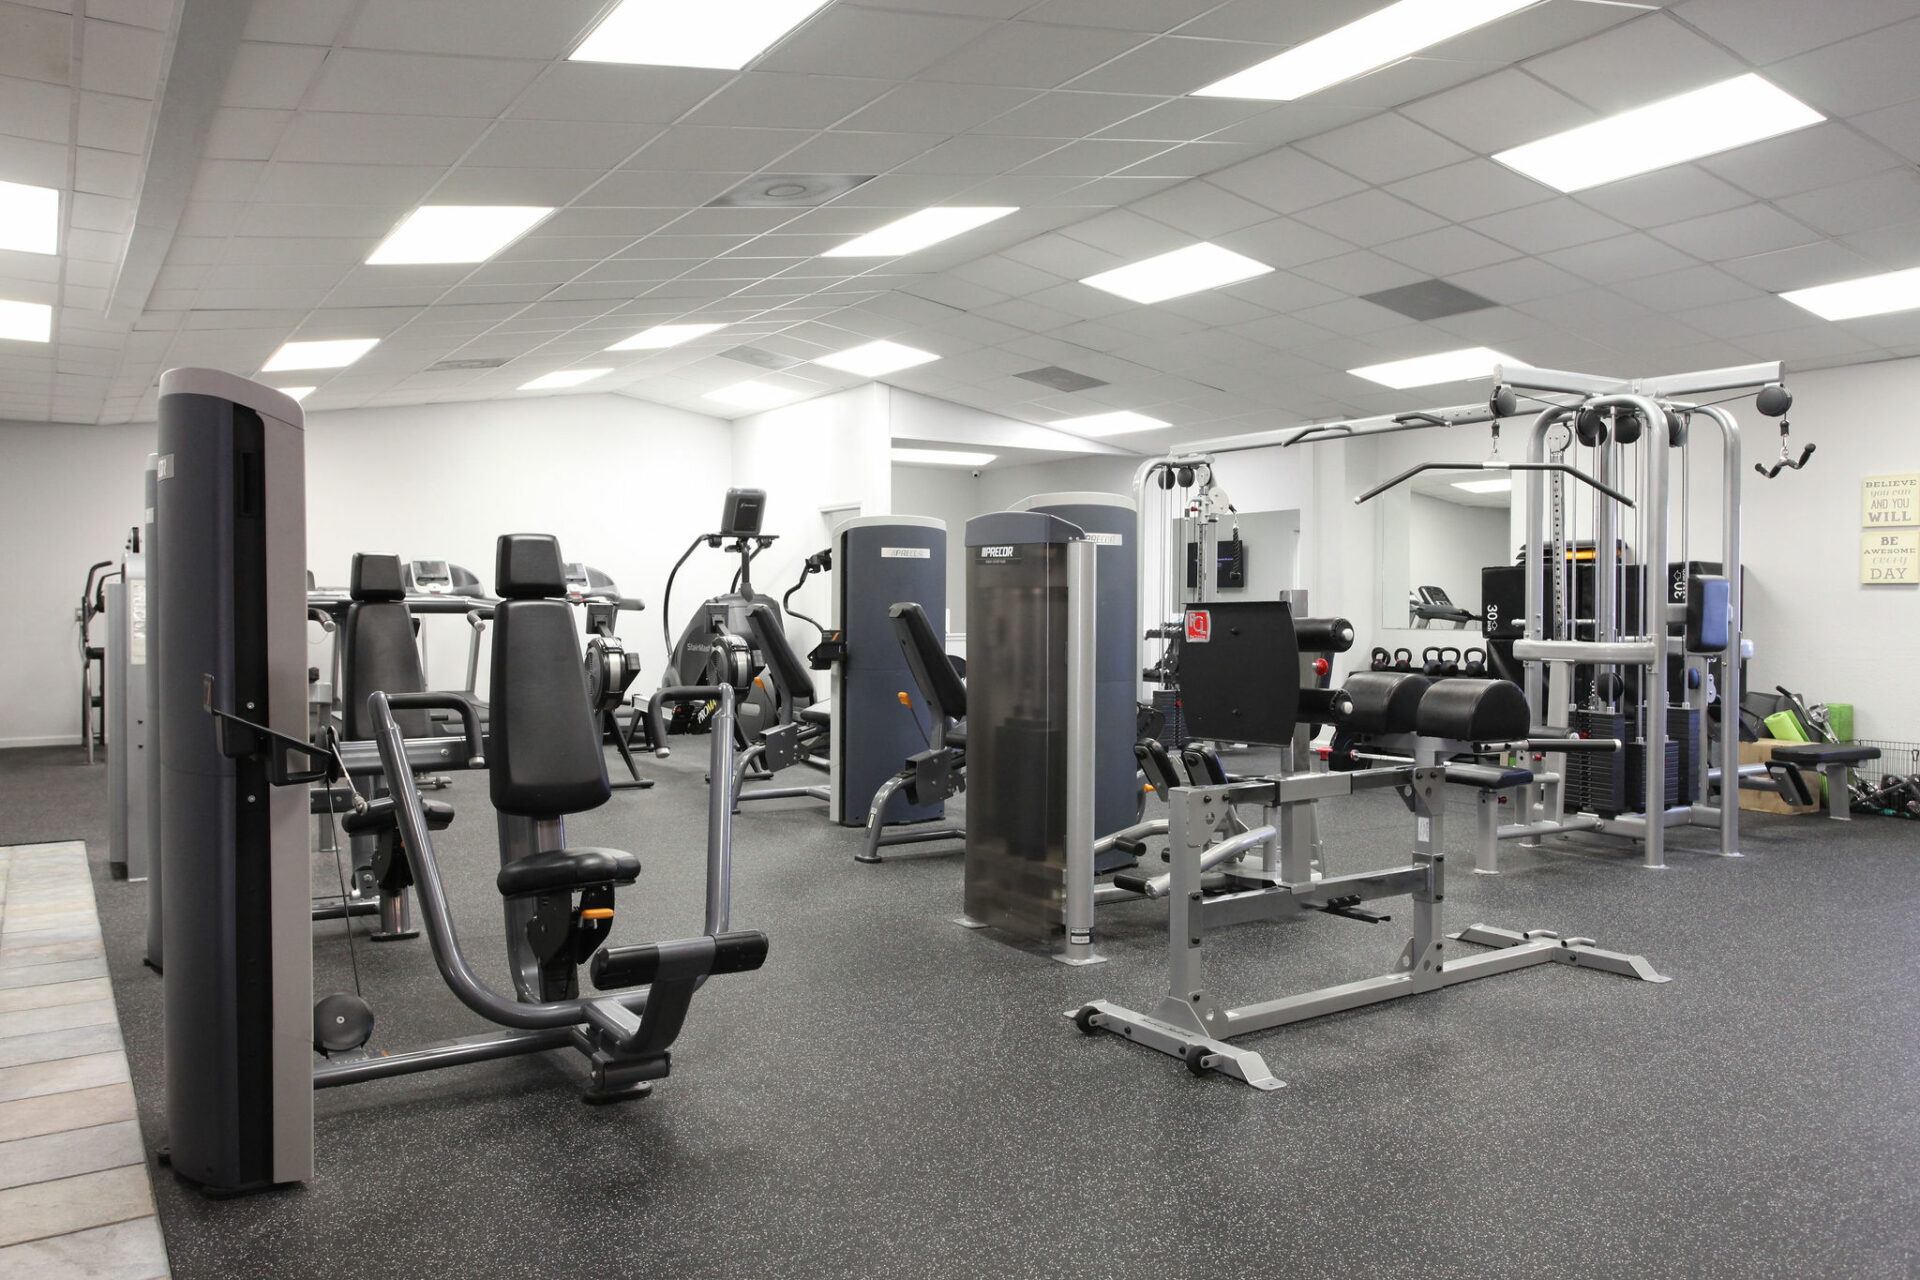 All latest gym equipment is available at Iron Lady Fitness